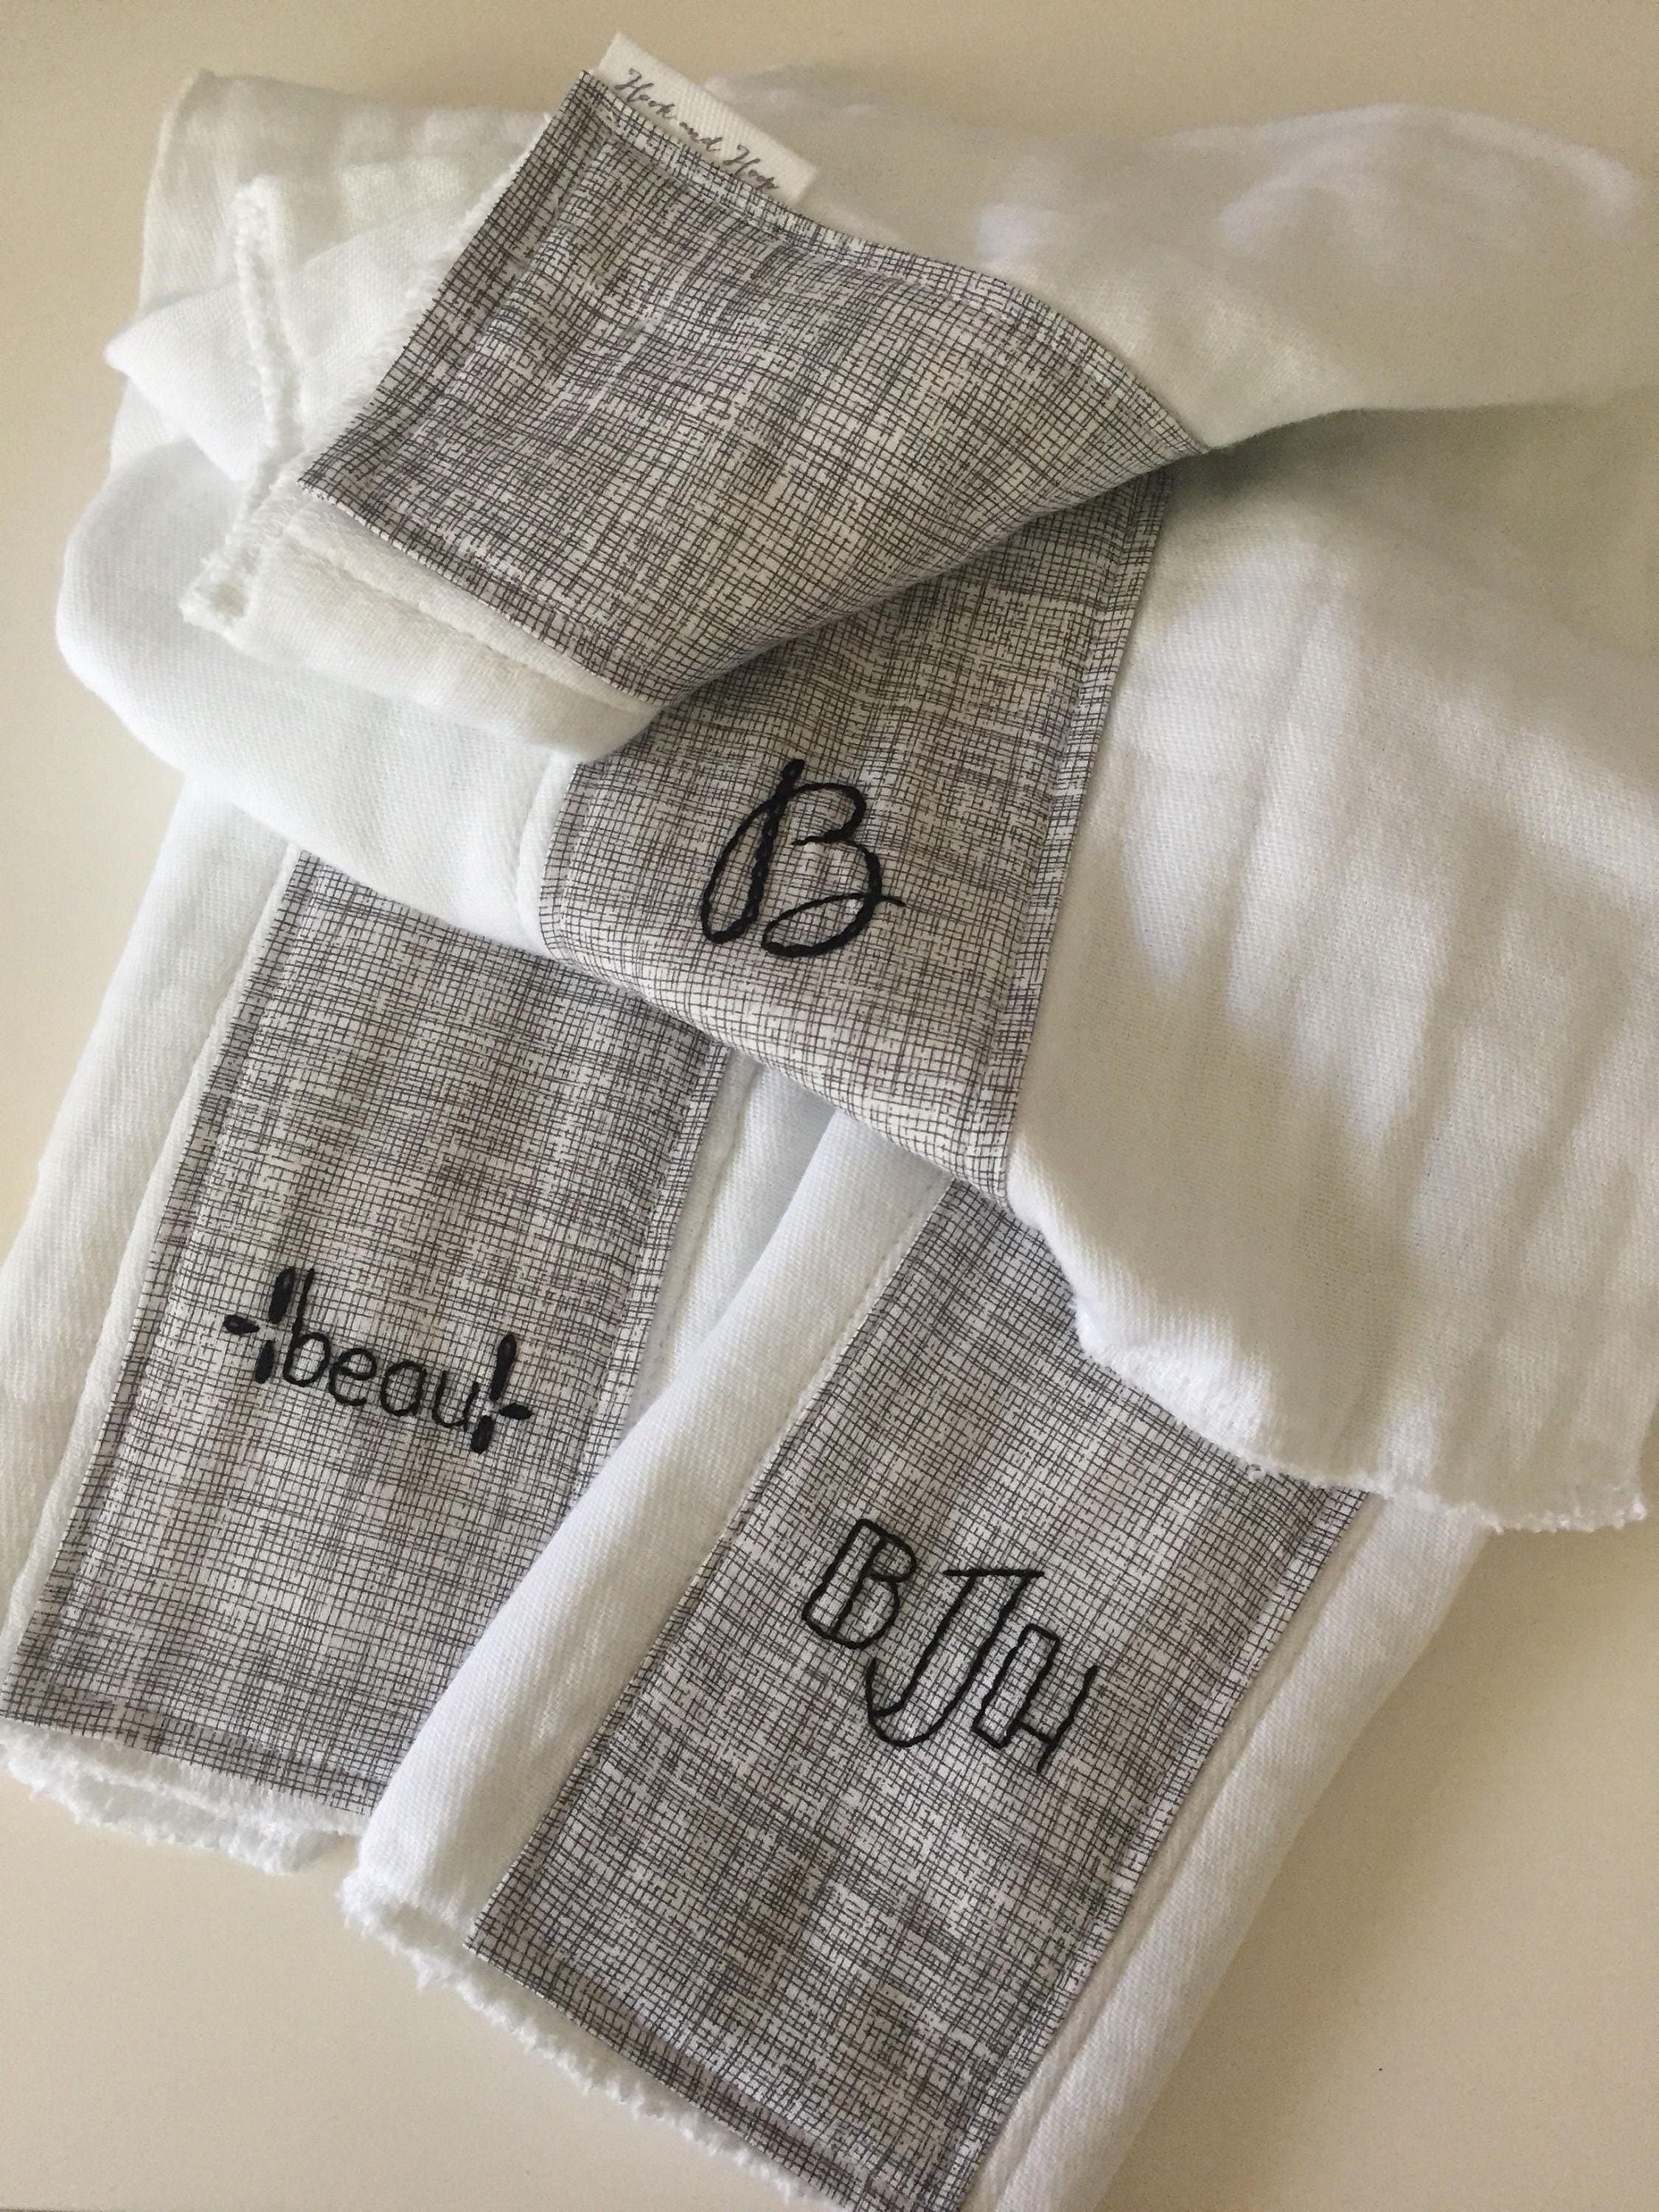 Baby Shower Set of 3 Monogrammed Gift Personalized Baby Gift Diaper Bag Accessories Embroidered Burp Cloth Personalized Burp Cloth Set